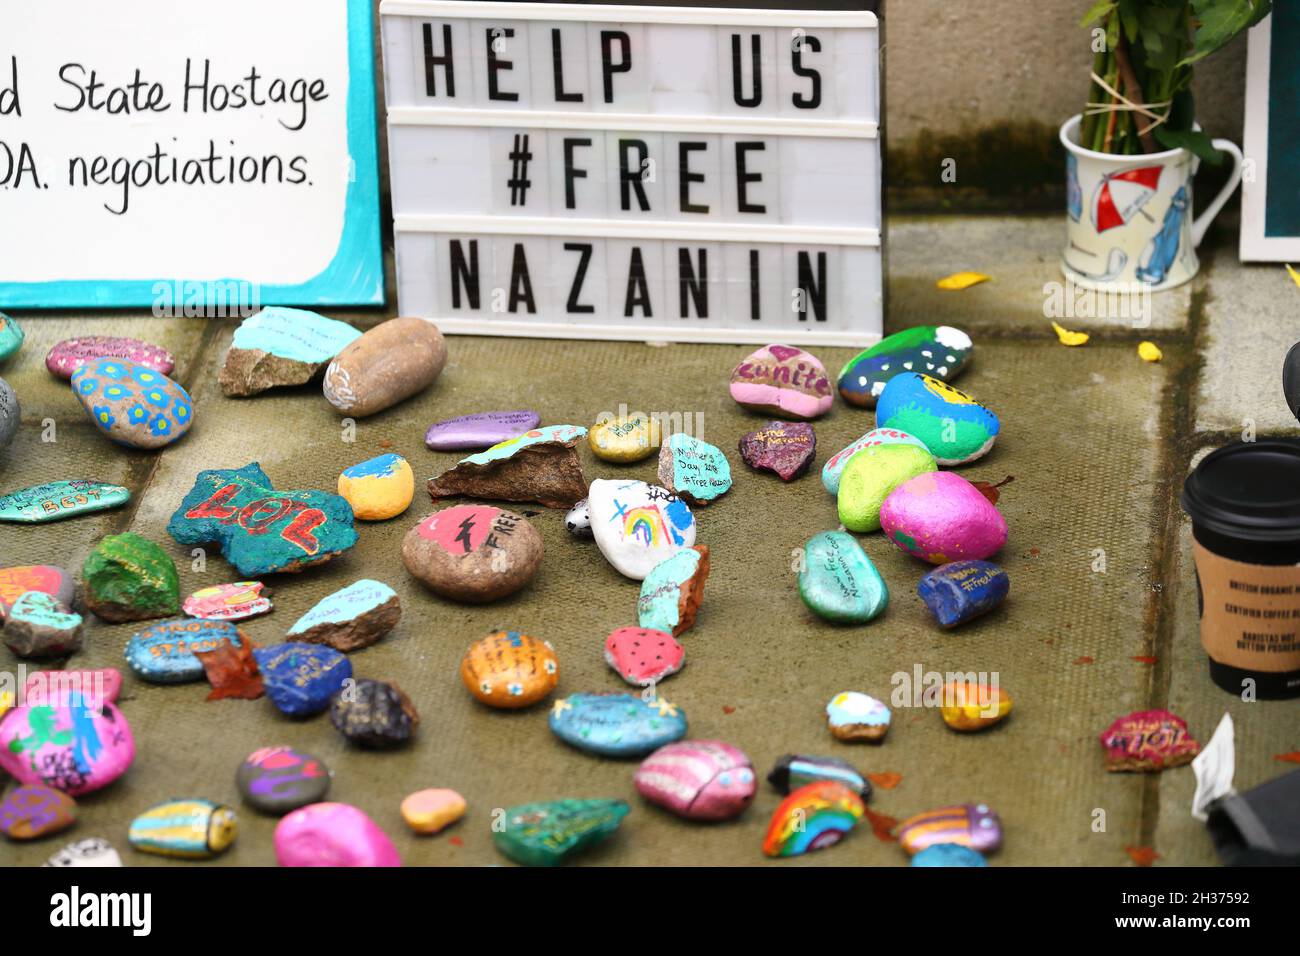 London, UK. 26th Oct, 2021. London, UK, October 26th. Painted pebbles with messages of support for detained Nazanin Zaghari-Ratcliffe. Credit: Uwe Deffner/Alamy Live News Stock Photo